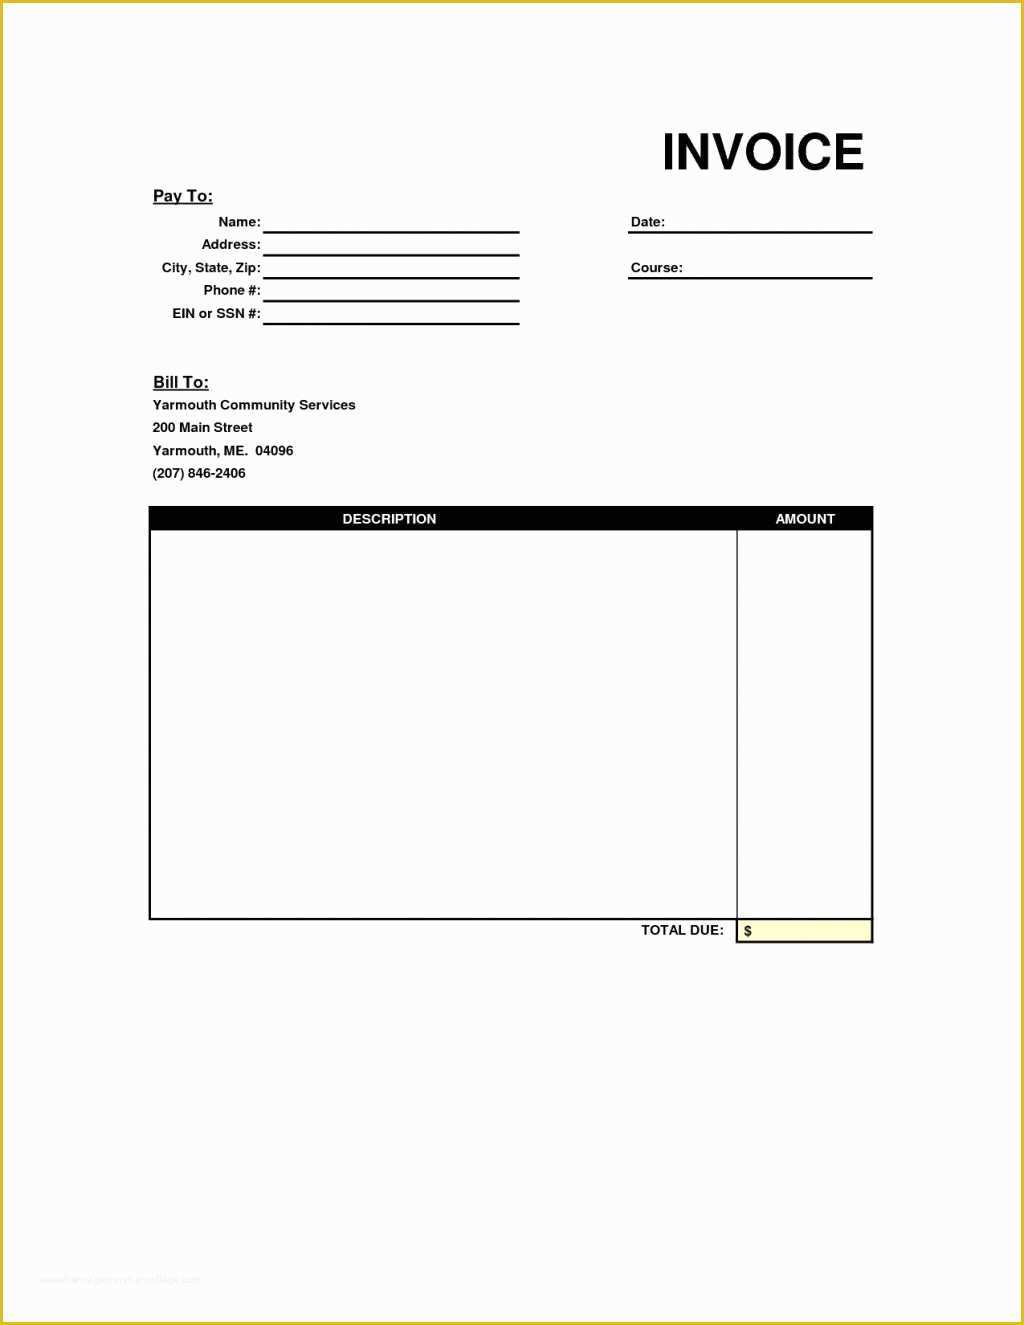 Basic Invoice Template Free Of Basic Invoice Template Free